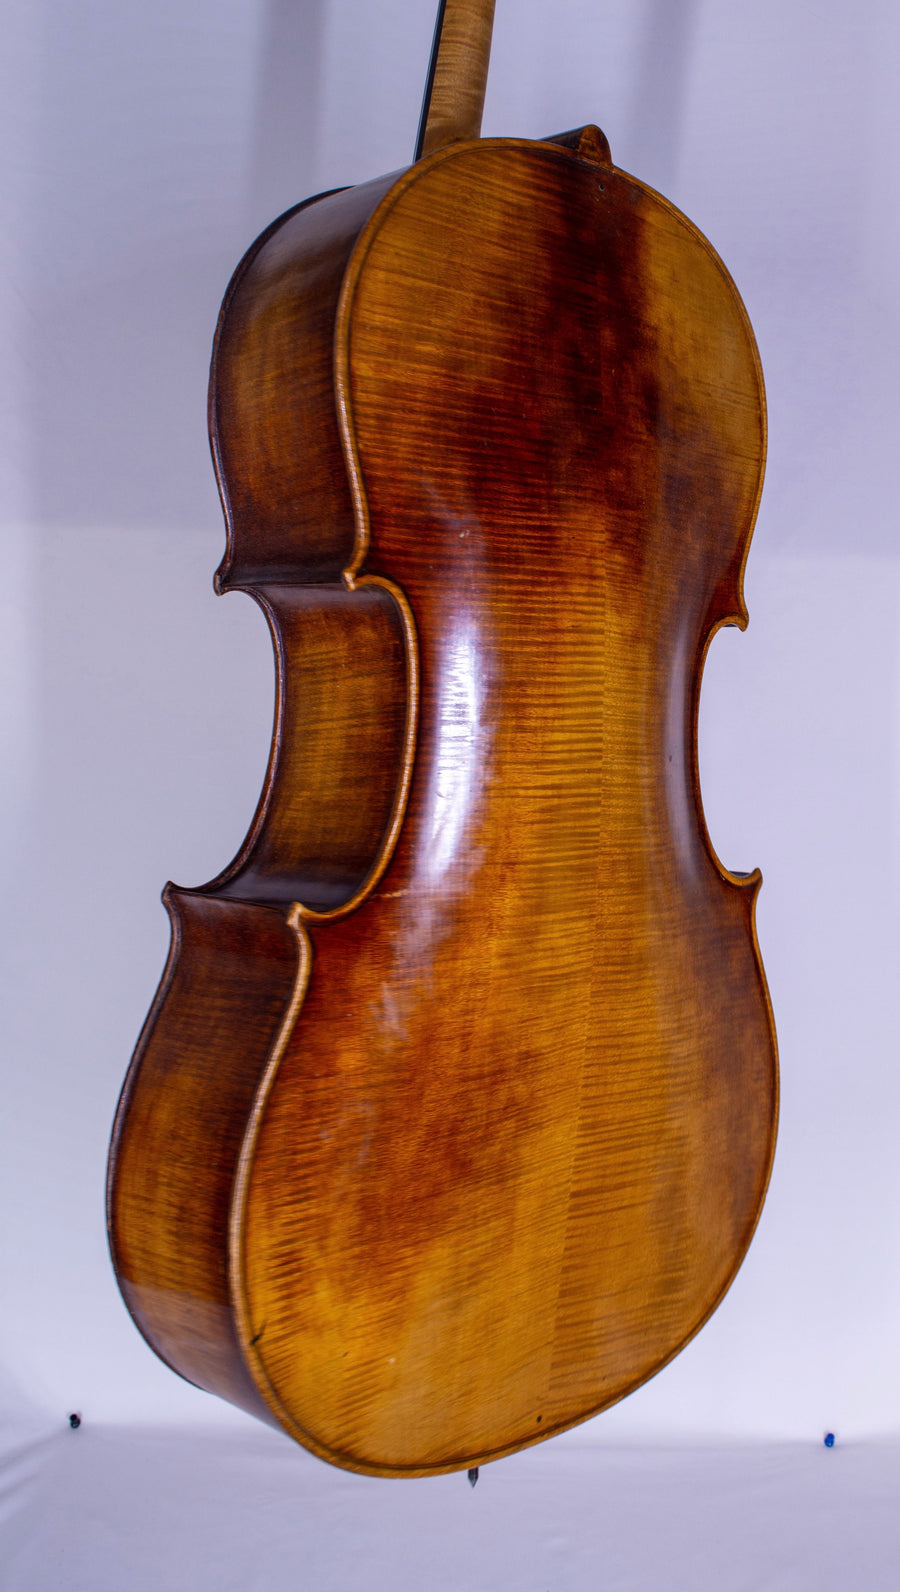 Herman Lowendall Cello, First Decade 20th Century